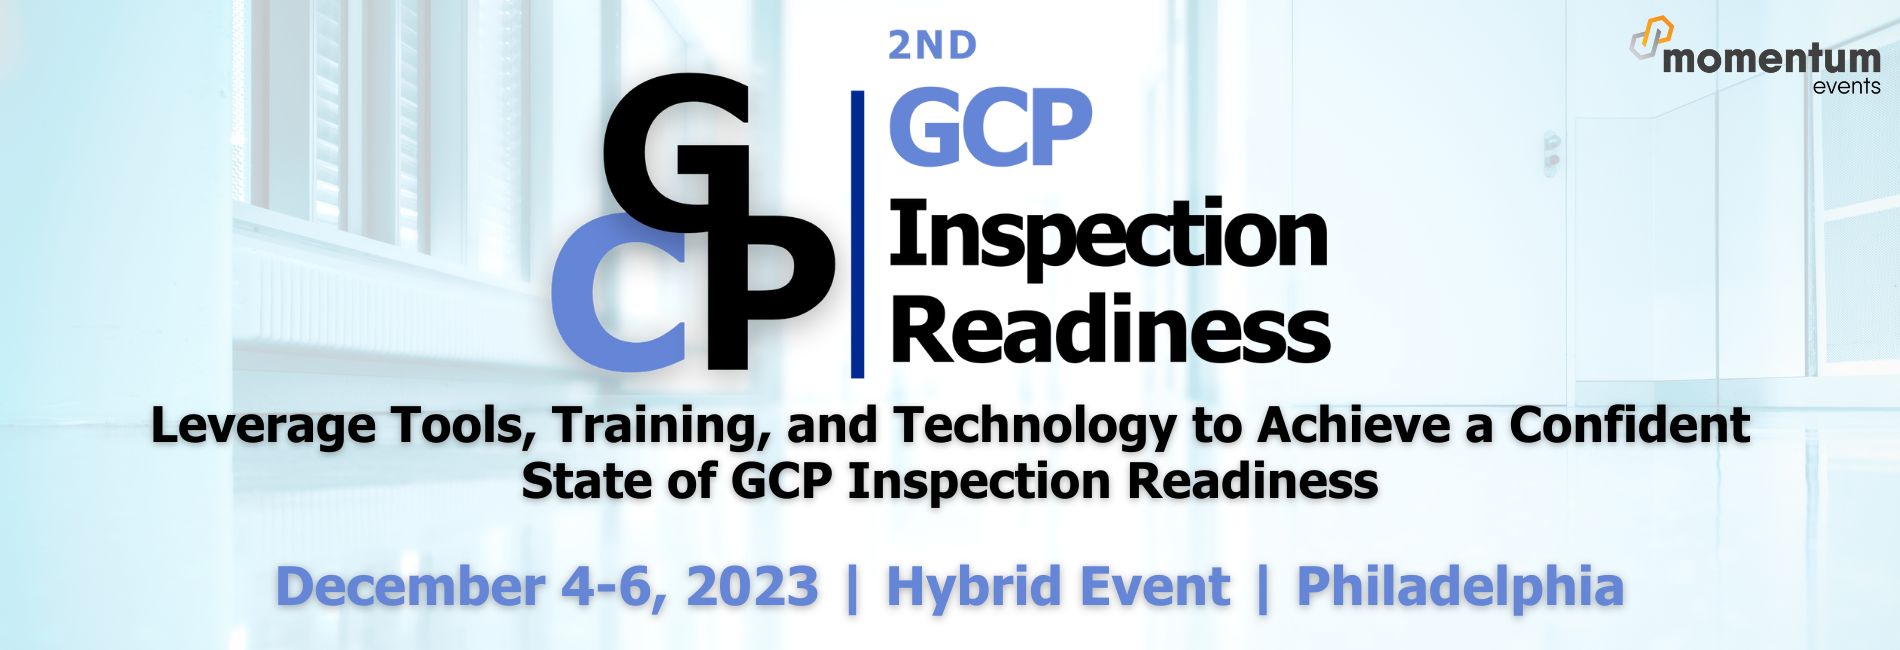 2nd GCP Inspection Readiness